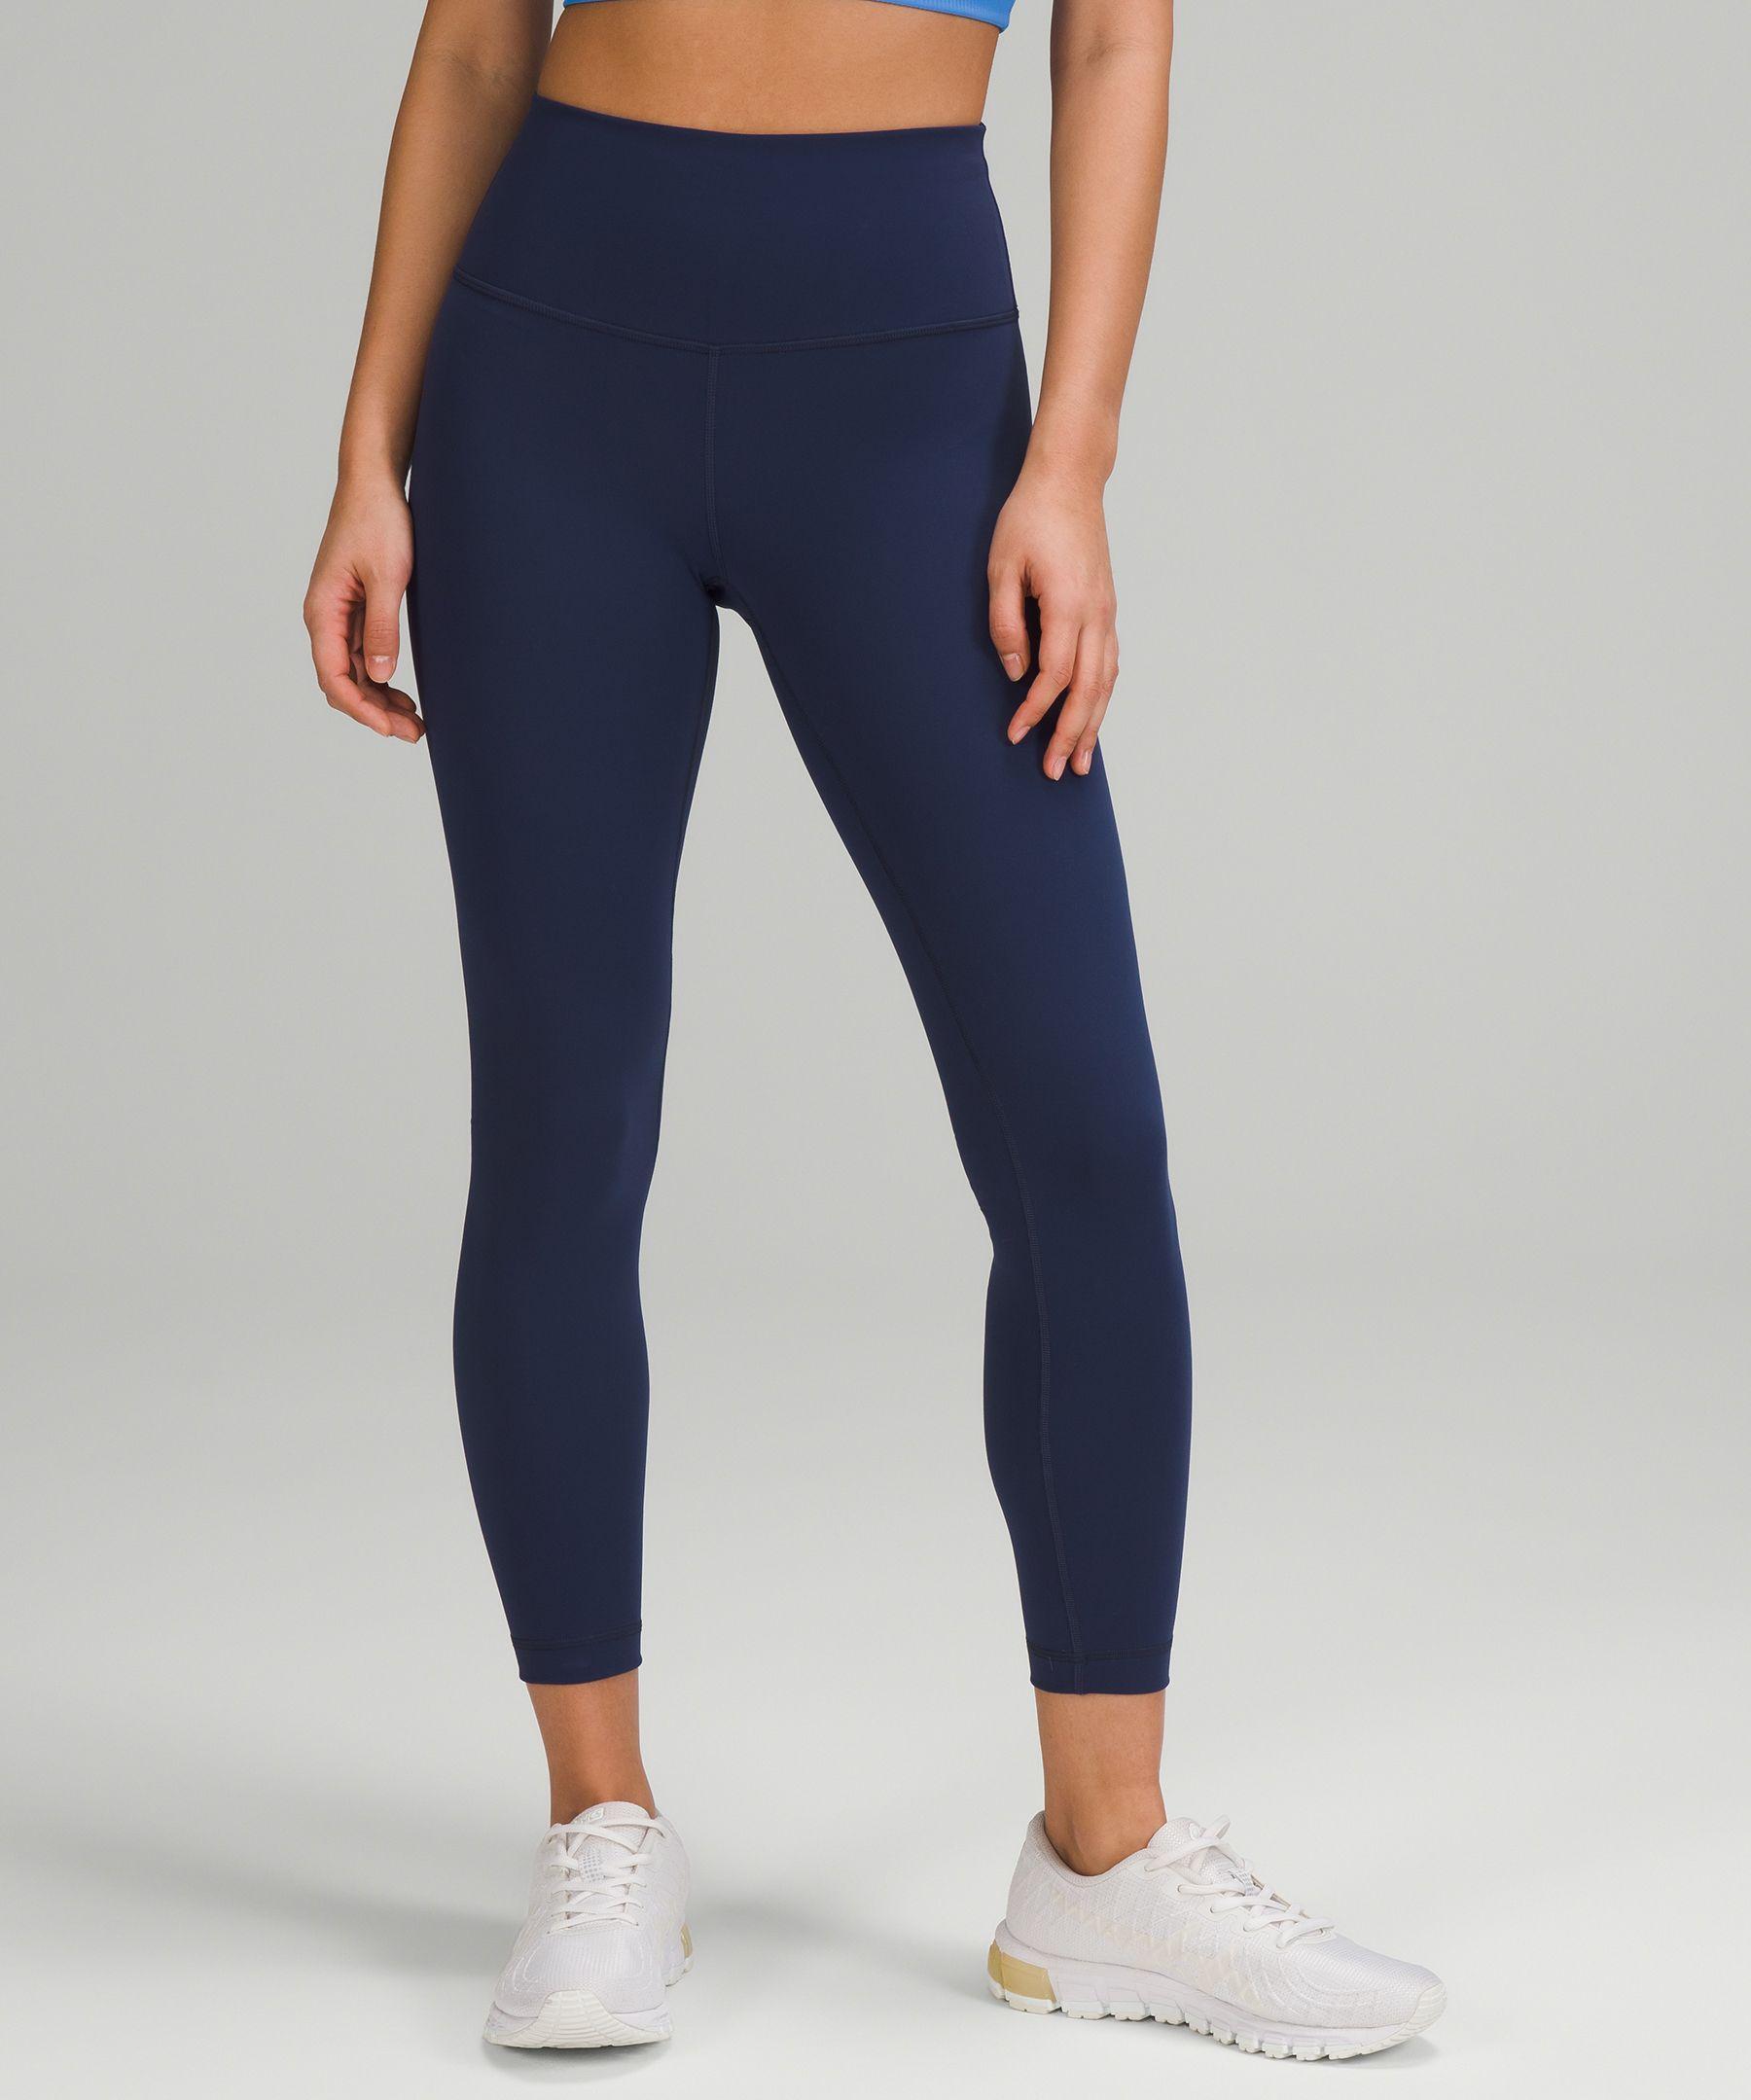 Lululemon Wunder Train High-Rise Tight 25", a high-end pair primed for activity